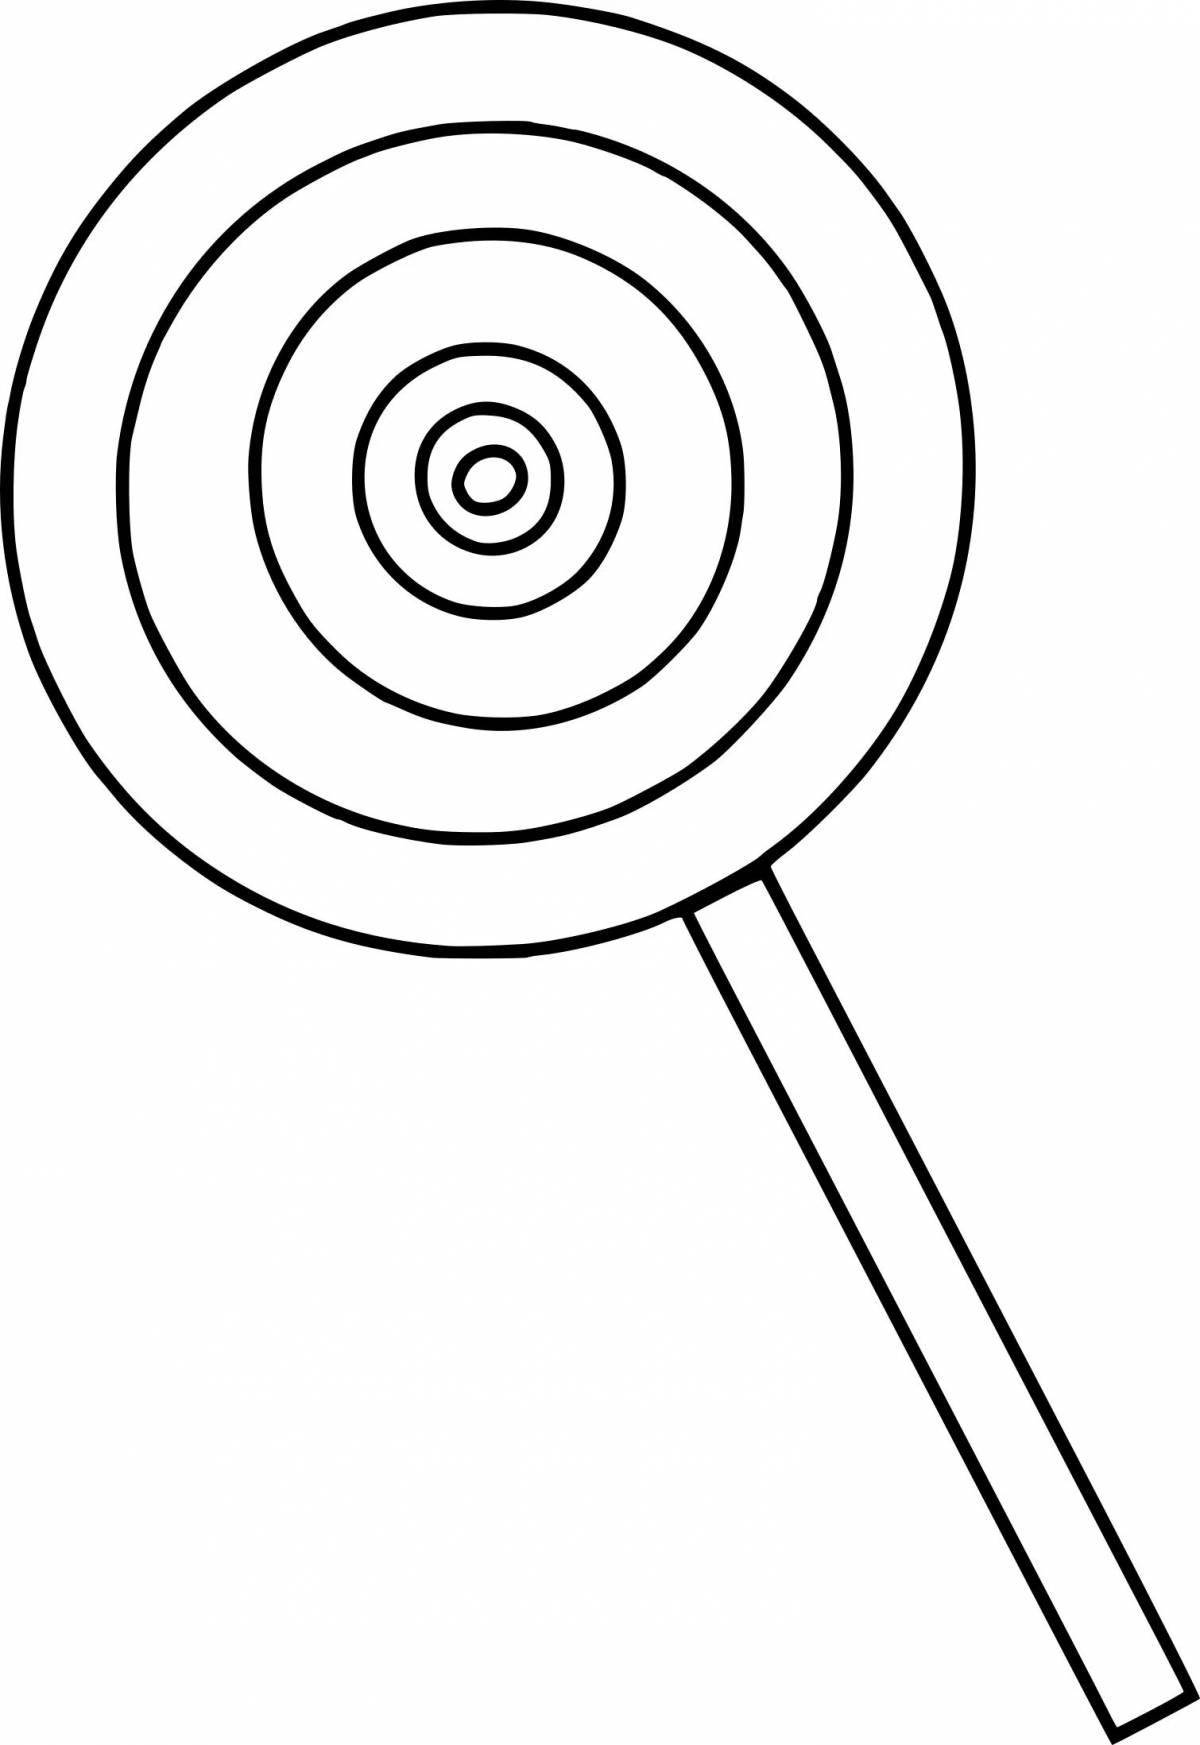 Sweet lollipop coloring page